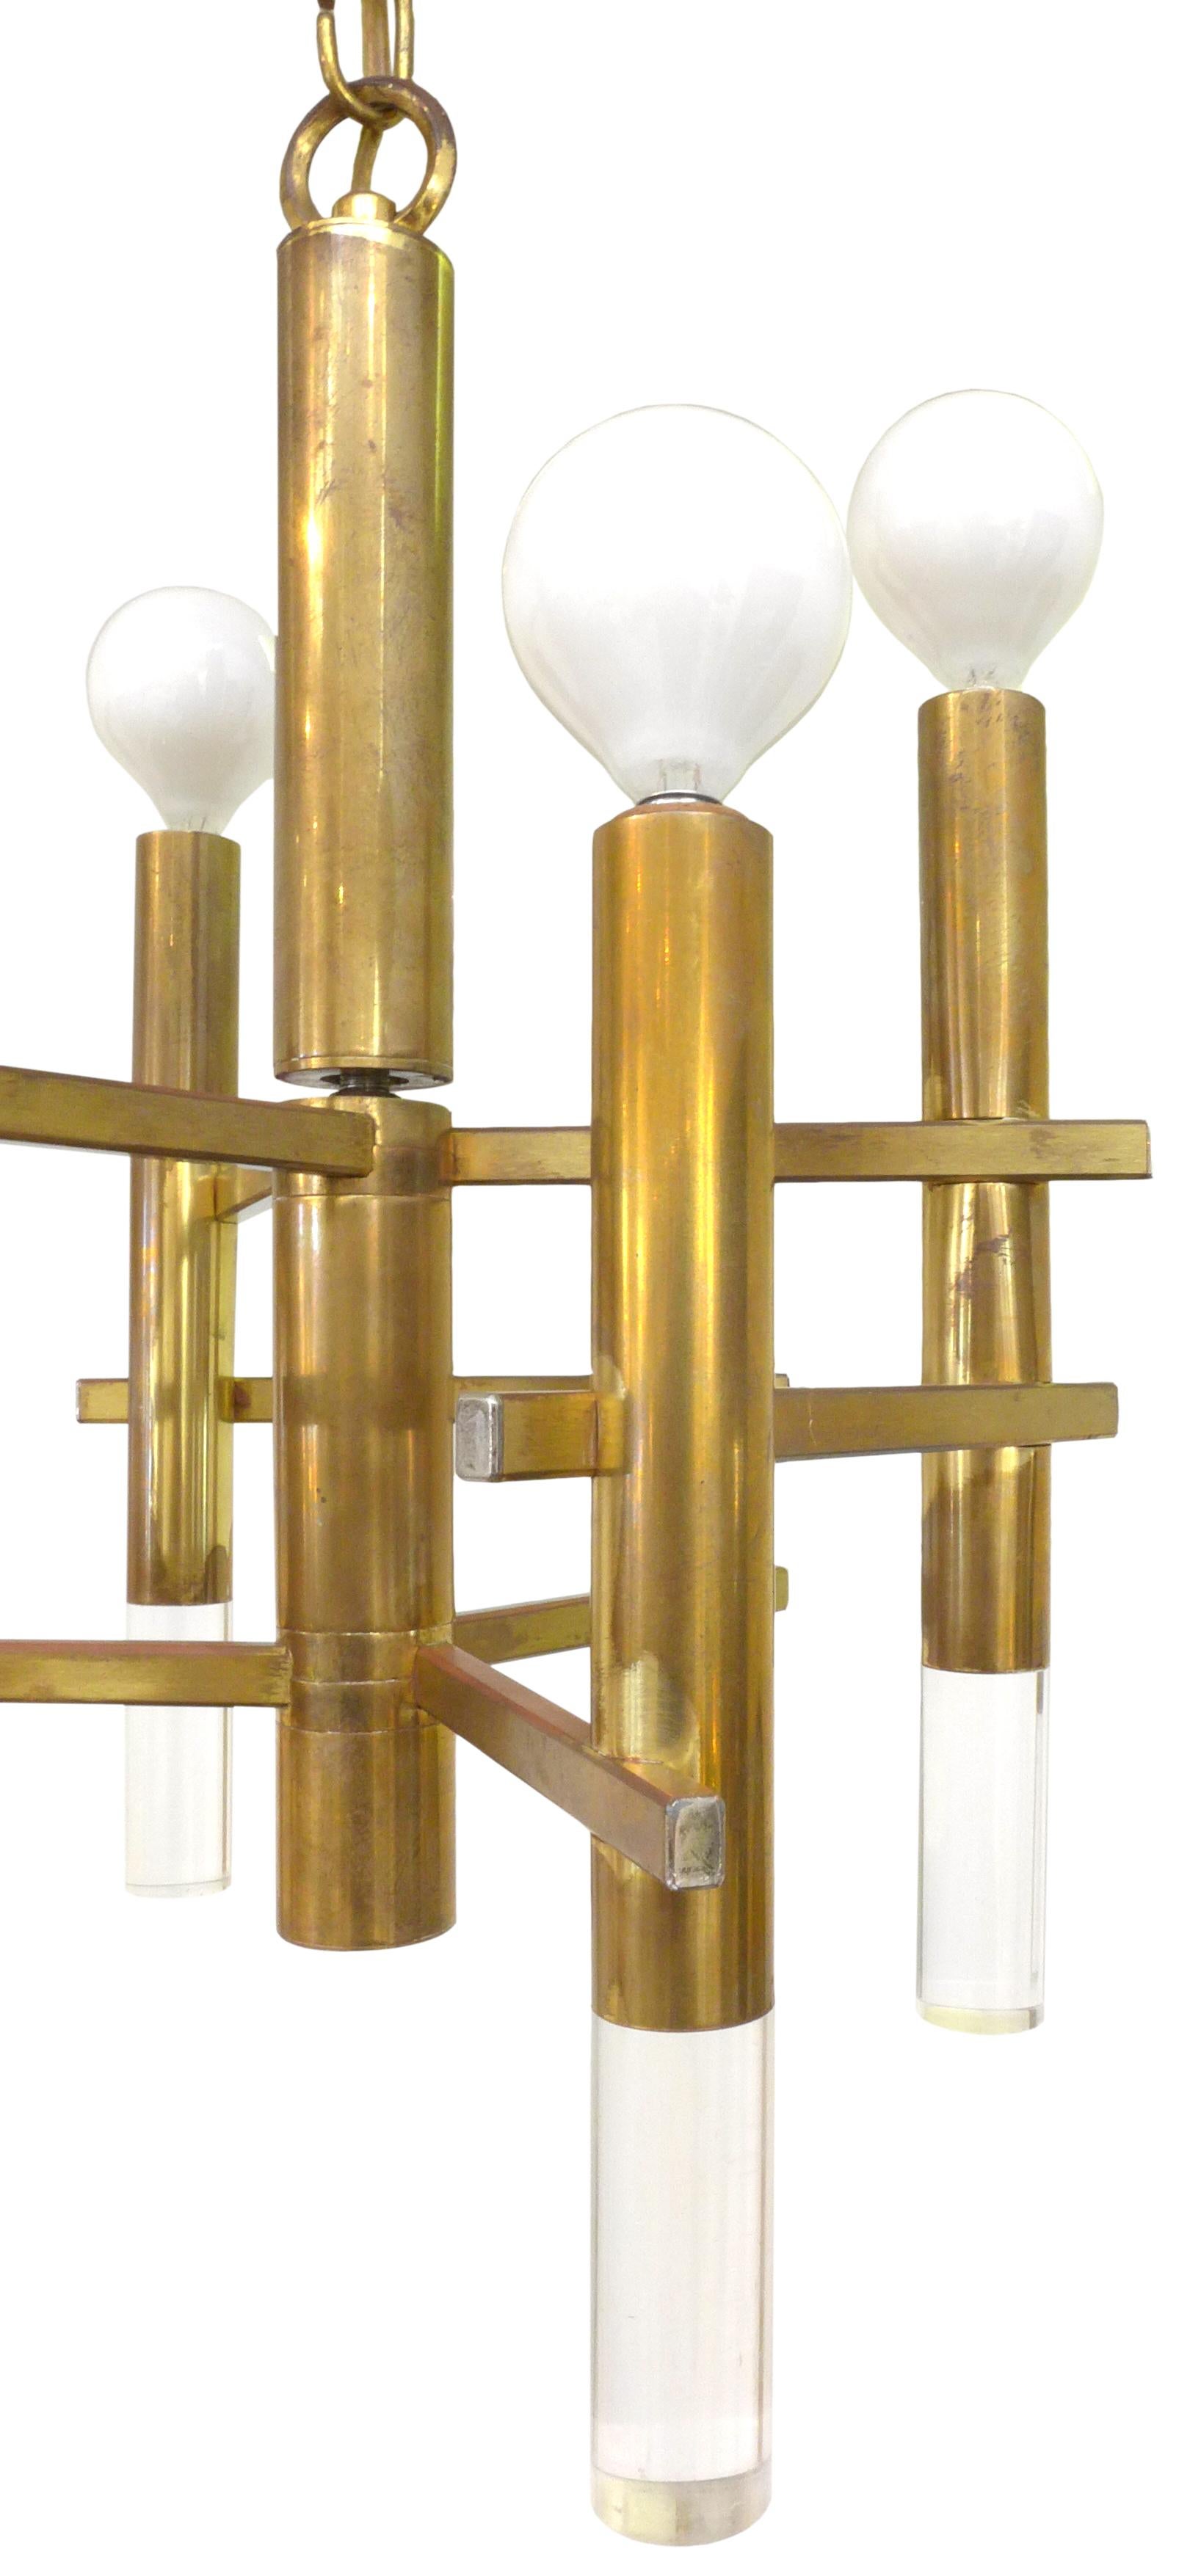 Modernist brass and Lucite chandelier, designed by Gaetano Sciolari. An interesting composition of cylindrical brass tubes with downward-oriented Lucite finials, fortified with horizontally applied square-stock brass “sticks”. Six up-light